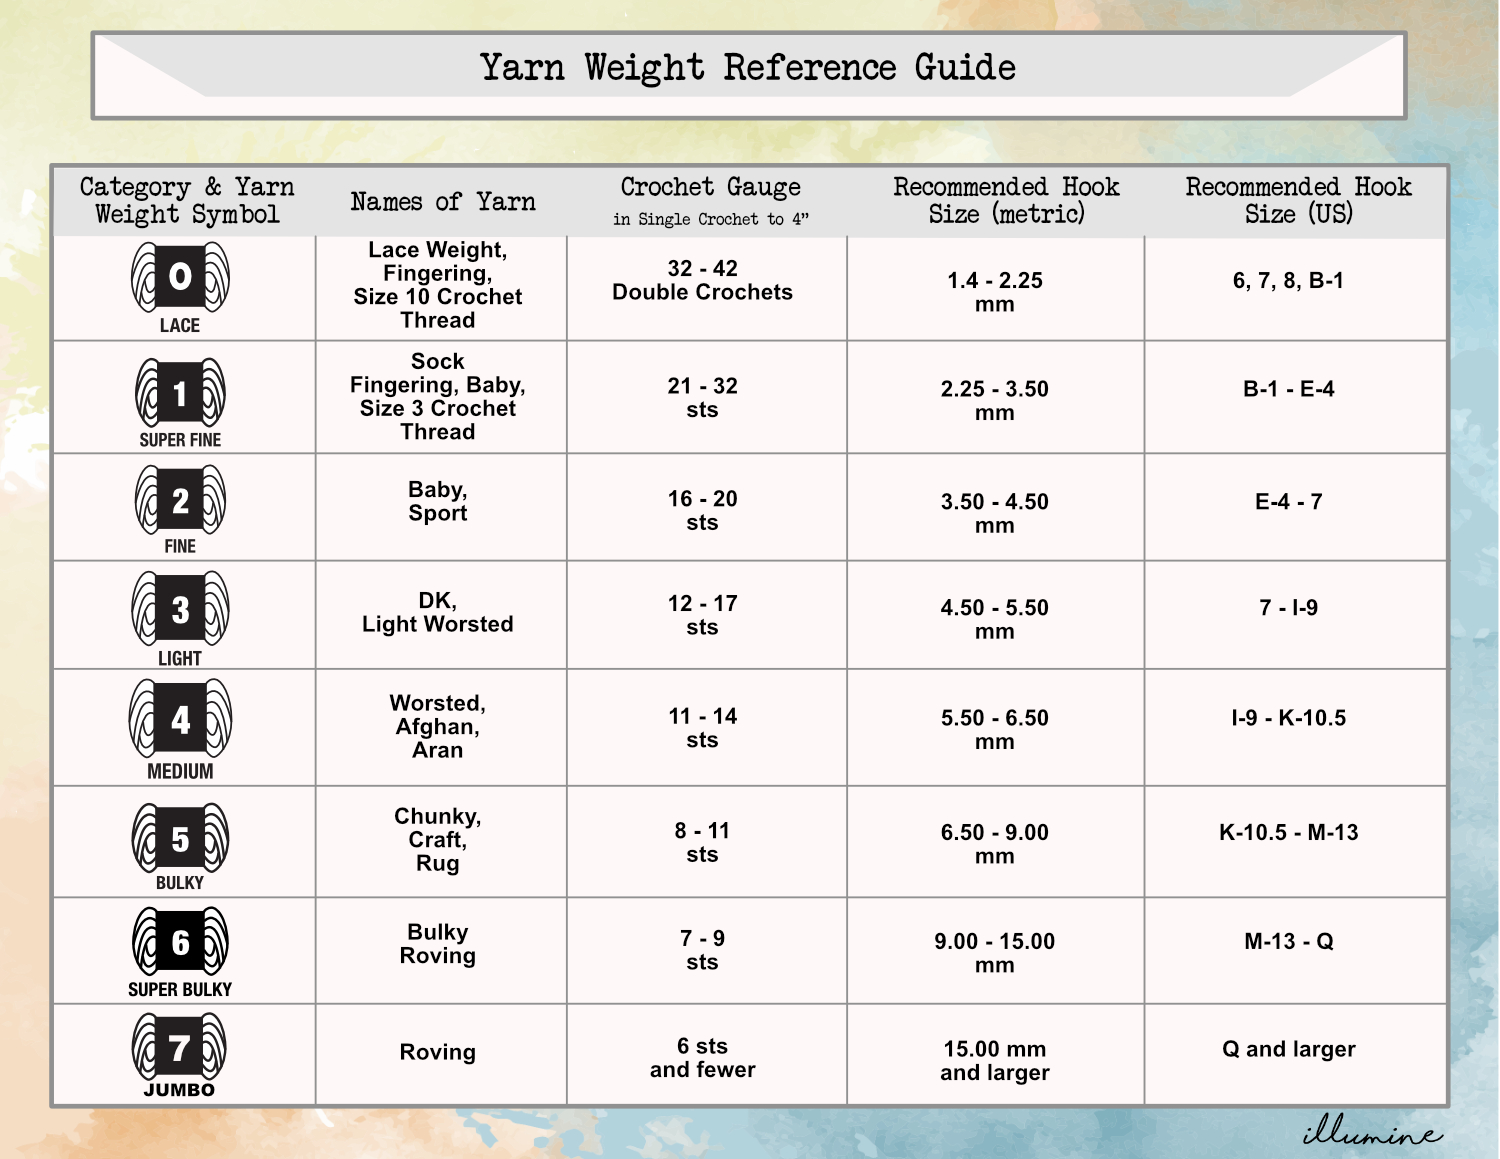 Yarn Weights, Gauges, and Hook Sizes